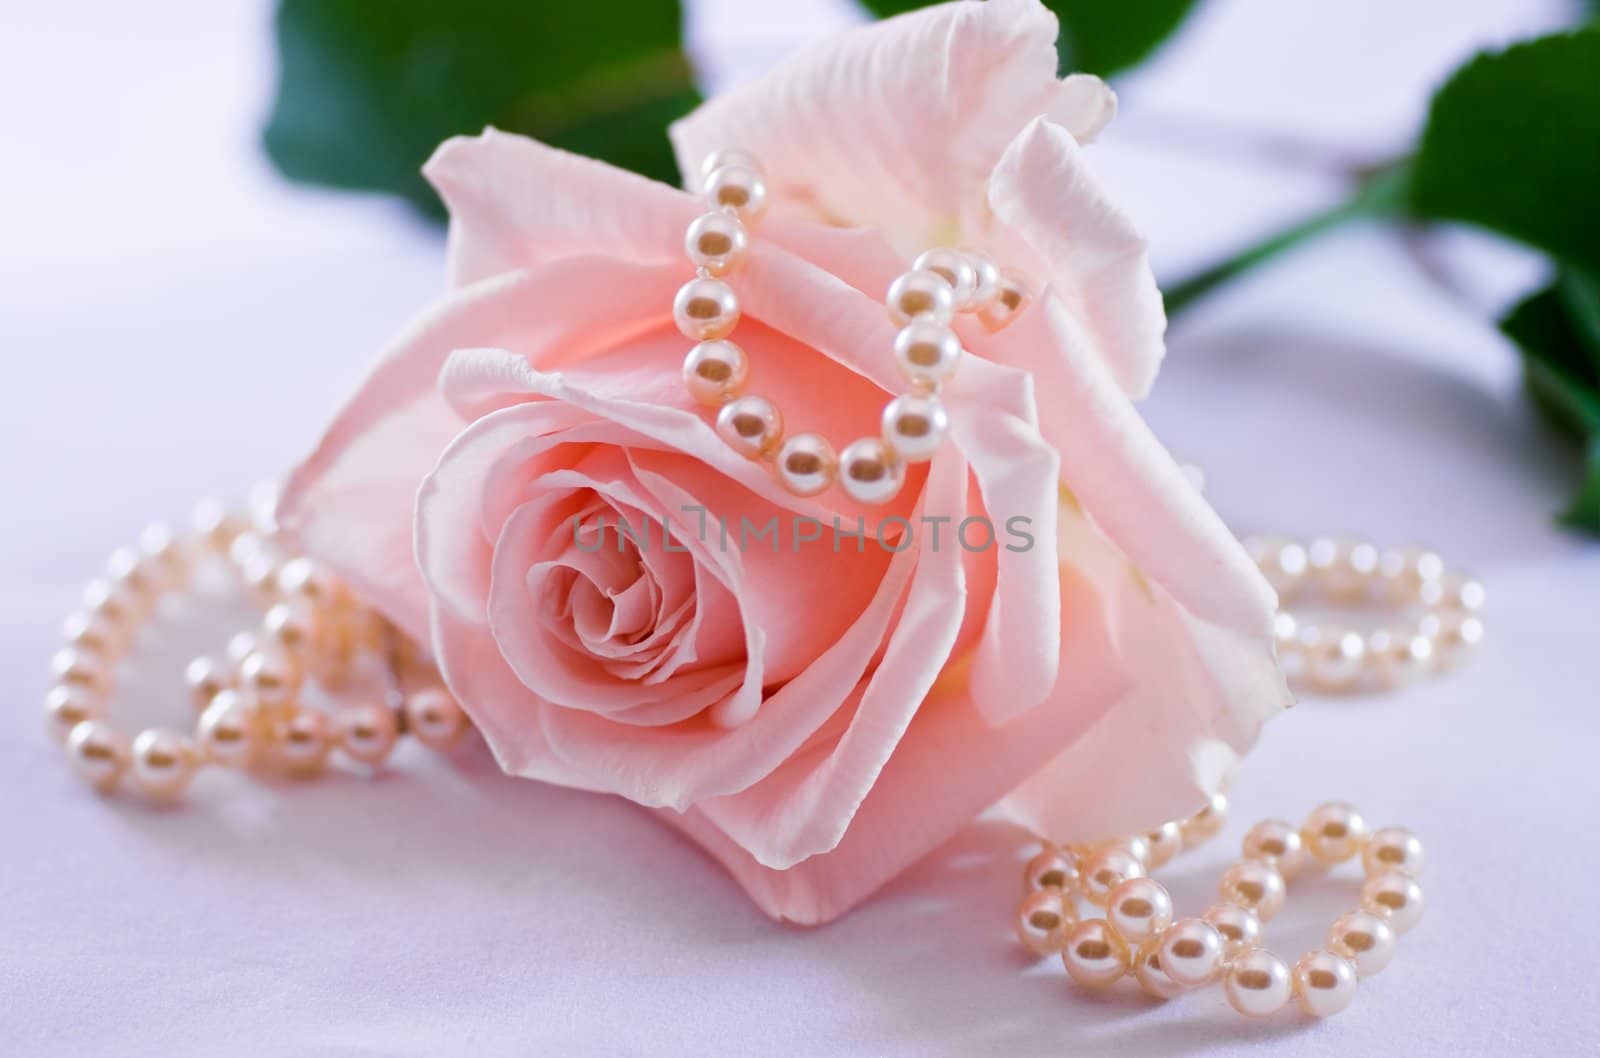 Pearl necklace and soft pink rose by Colette